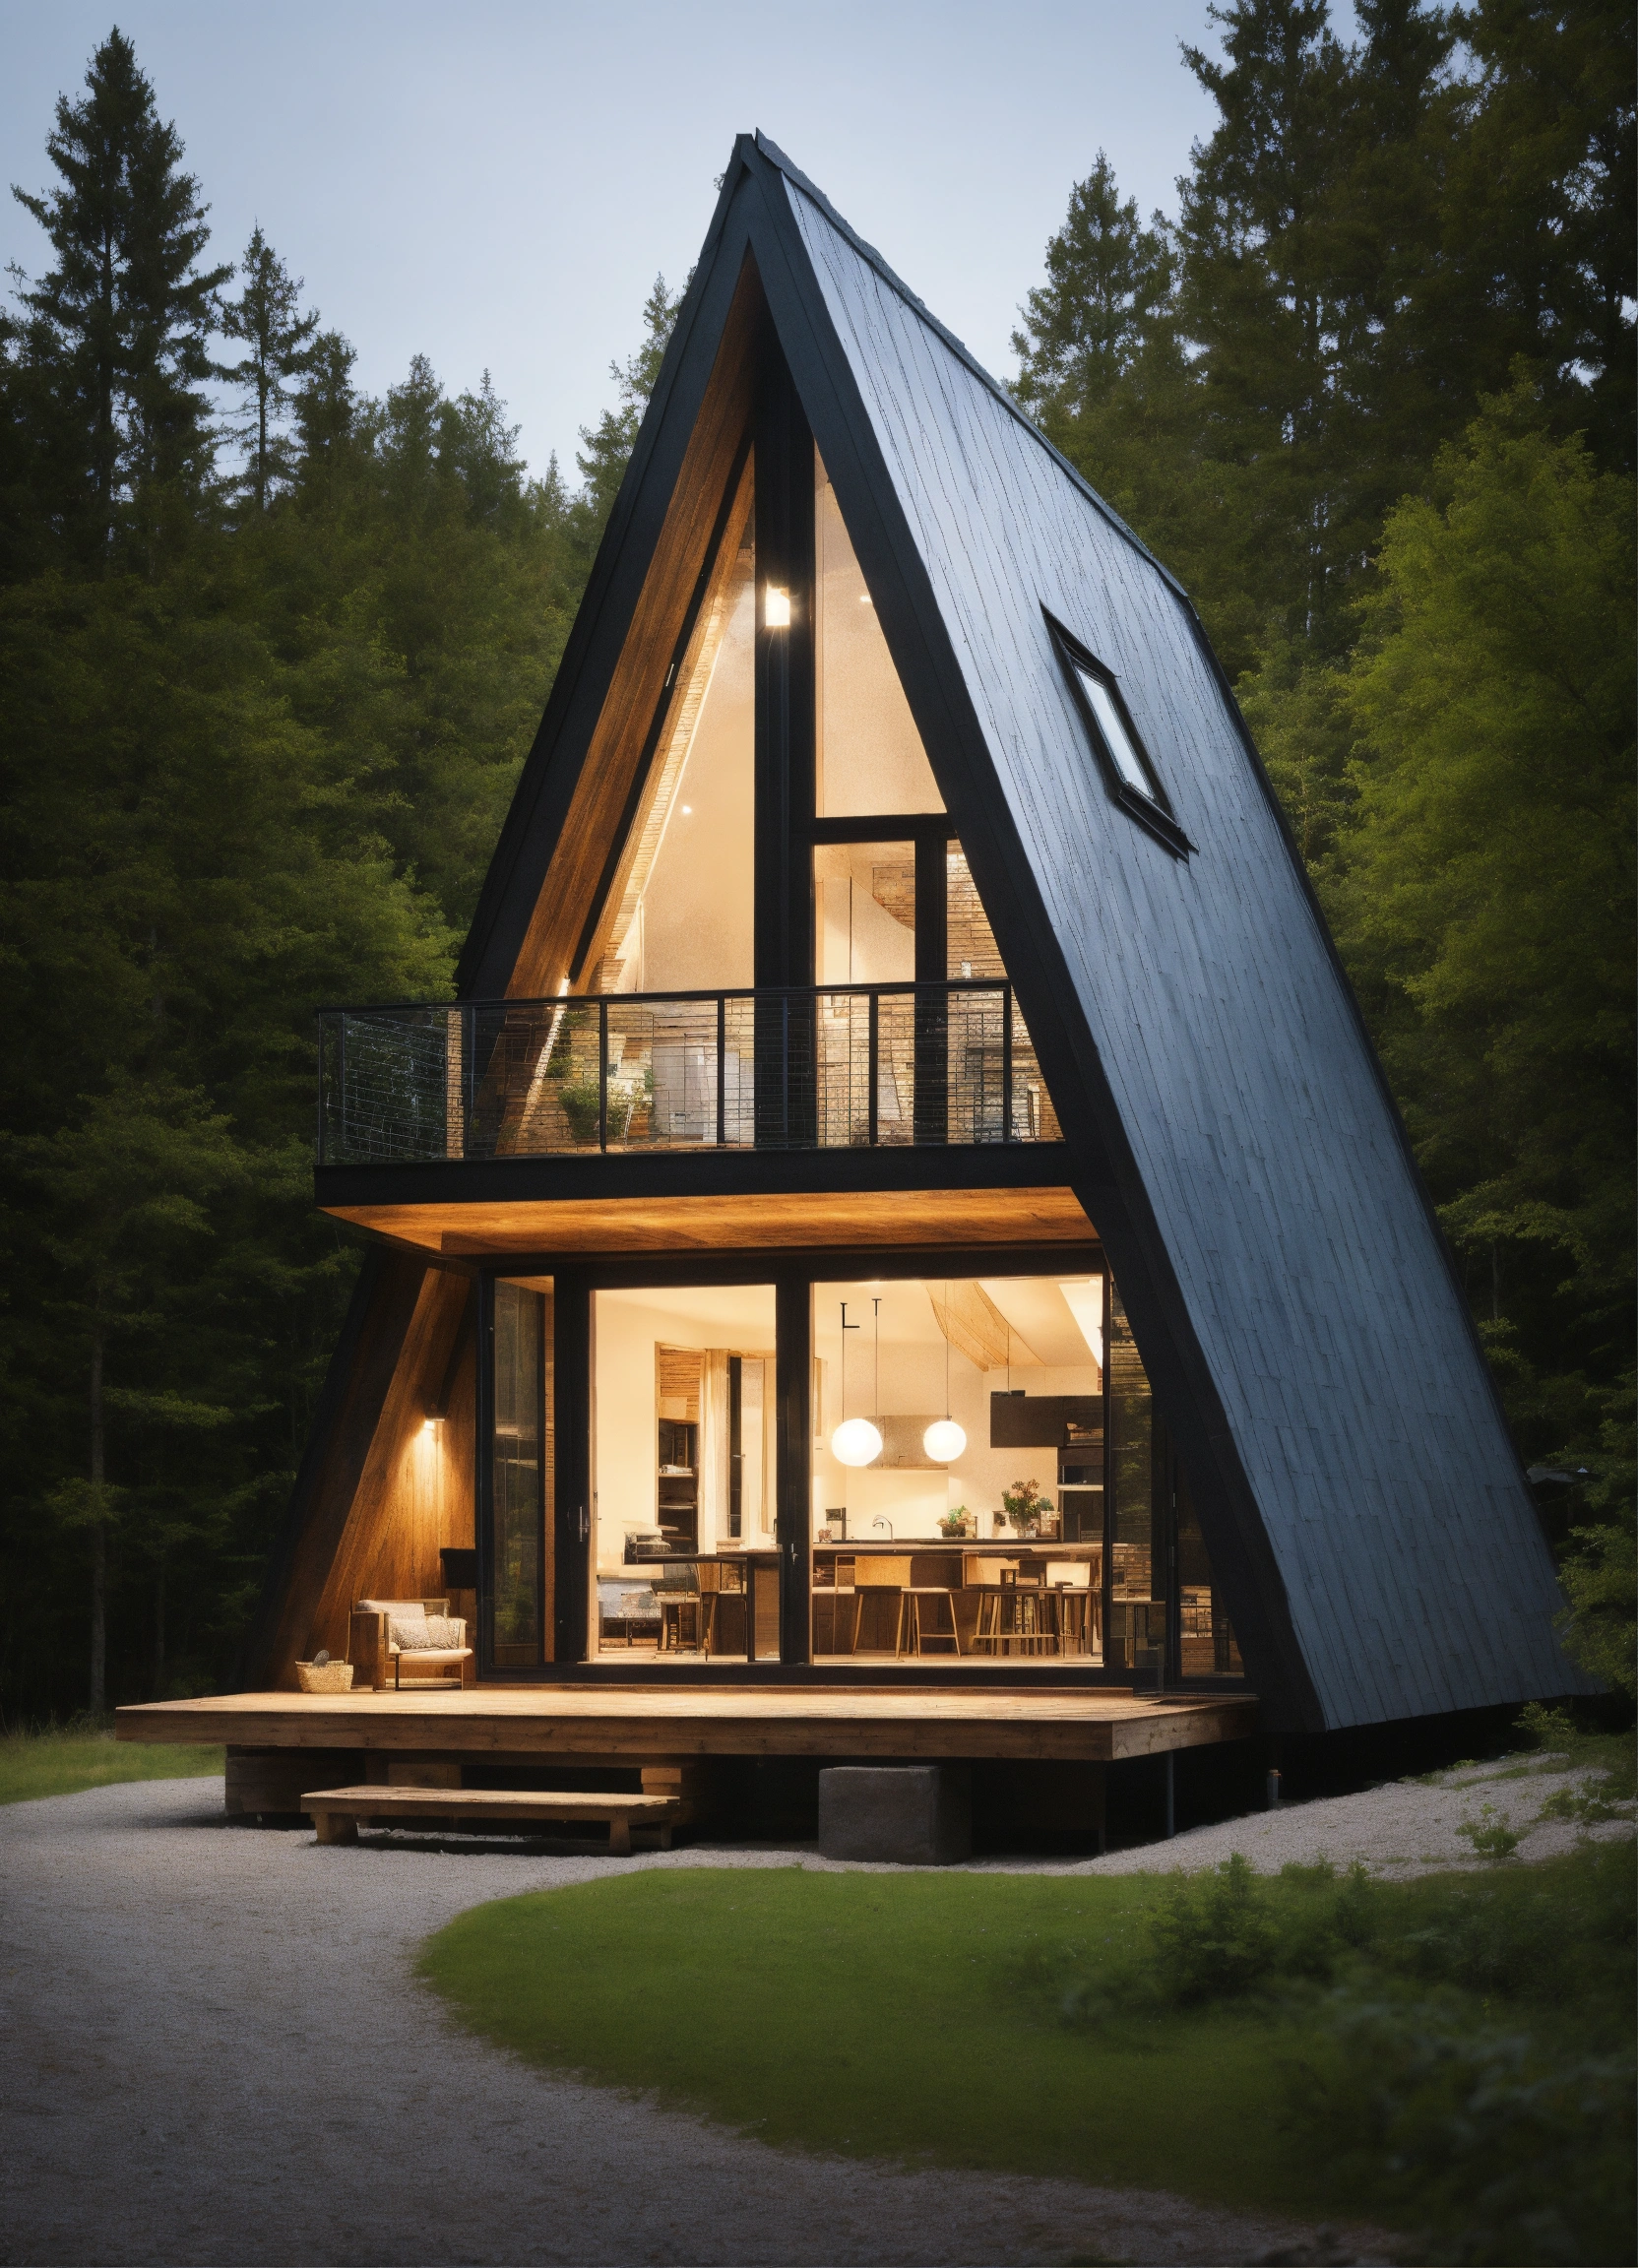 Lexica - Small a frame house modern touch, in woods, small